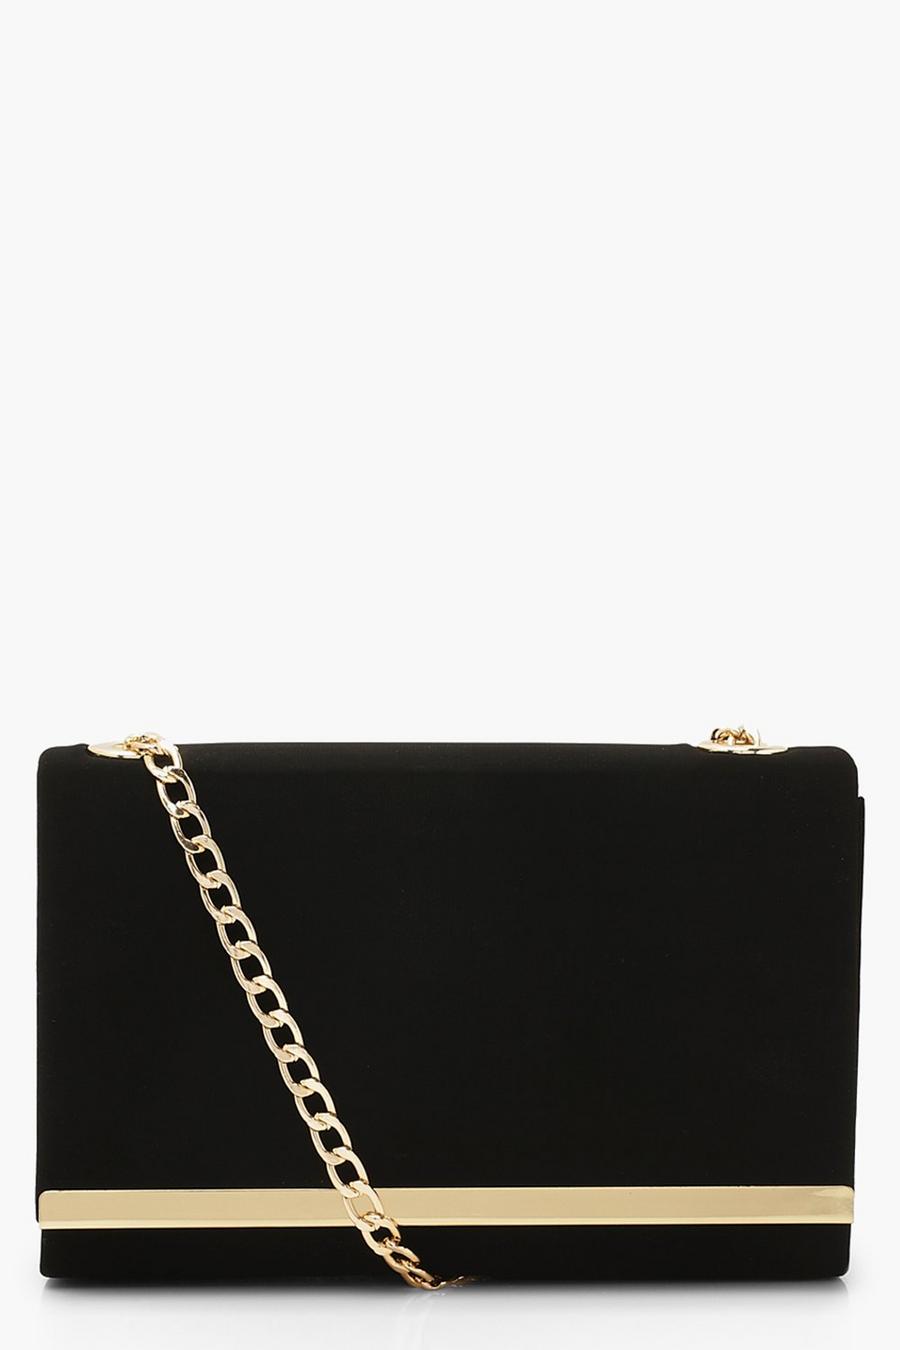 Black Structured Suedette Clutch Bag and Chain image number 1